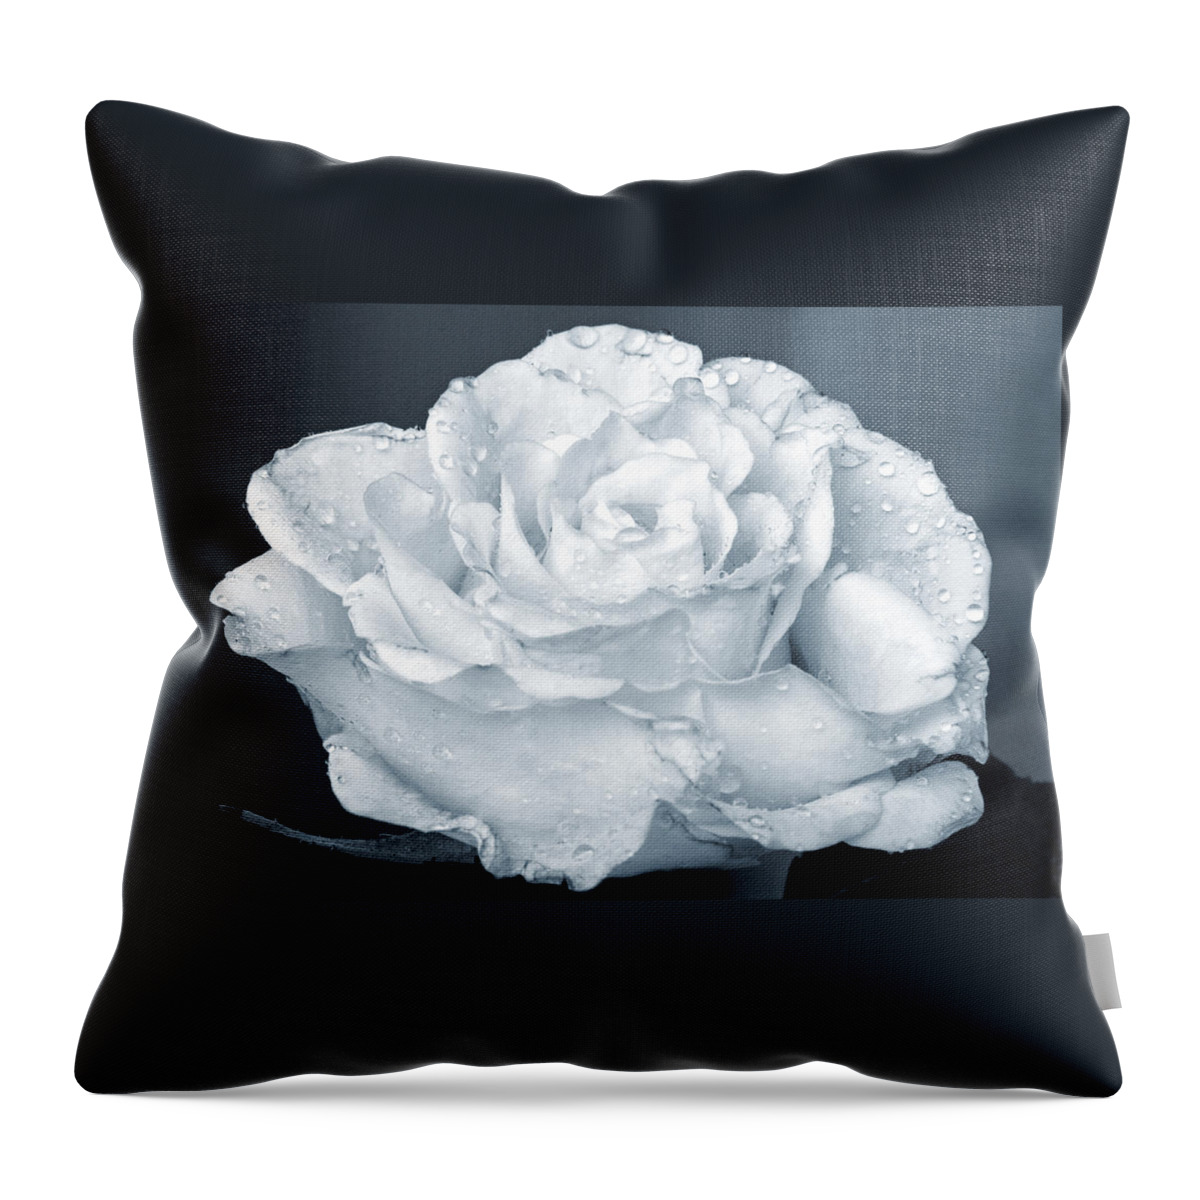 Rose Throw Pillow featuring the photograph A Real Cool Rose. by Terence Davis